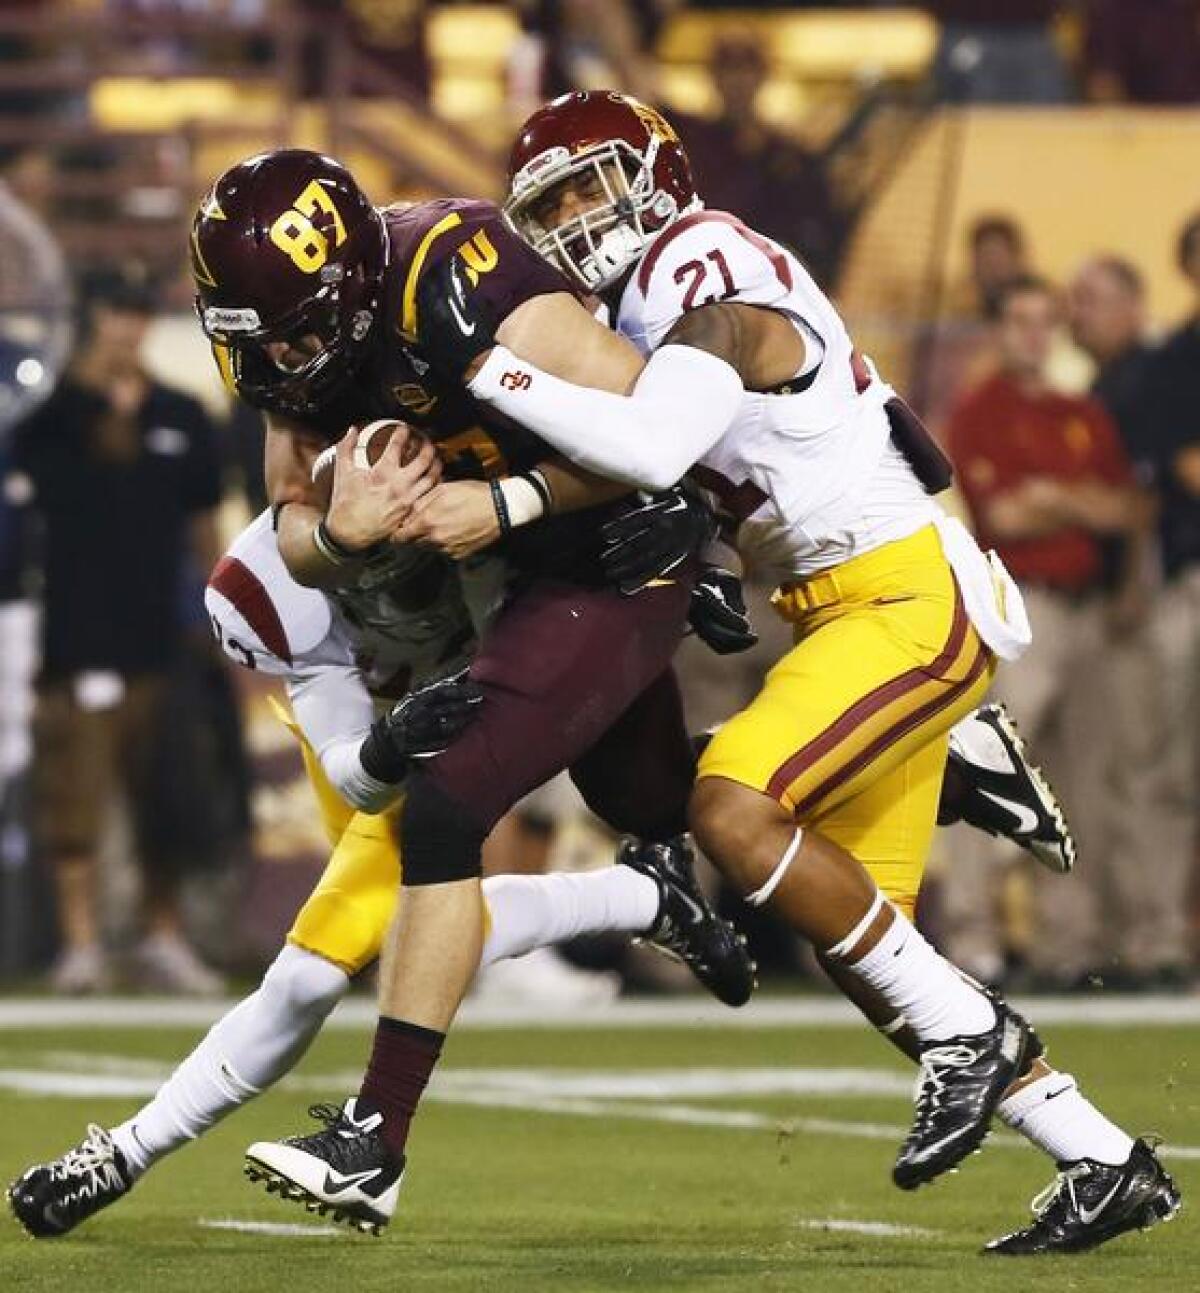 USC safety Su'a Cravens, right, tackles Arizona State tight end Chris Coyle during a game on Sept. 28. Don't expect to see Cravens contributing to the Trojans' offense in the near future.